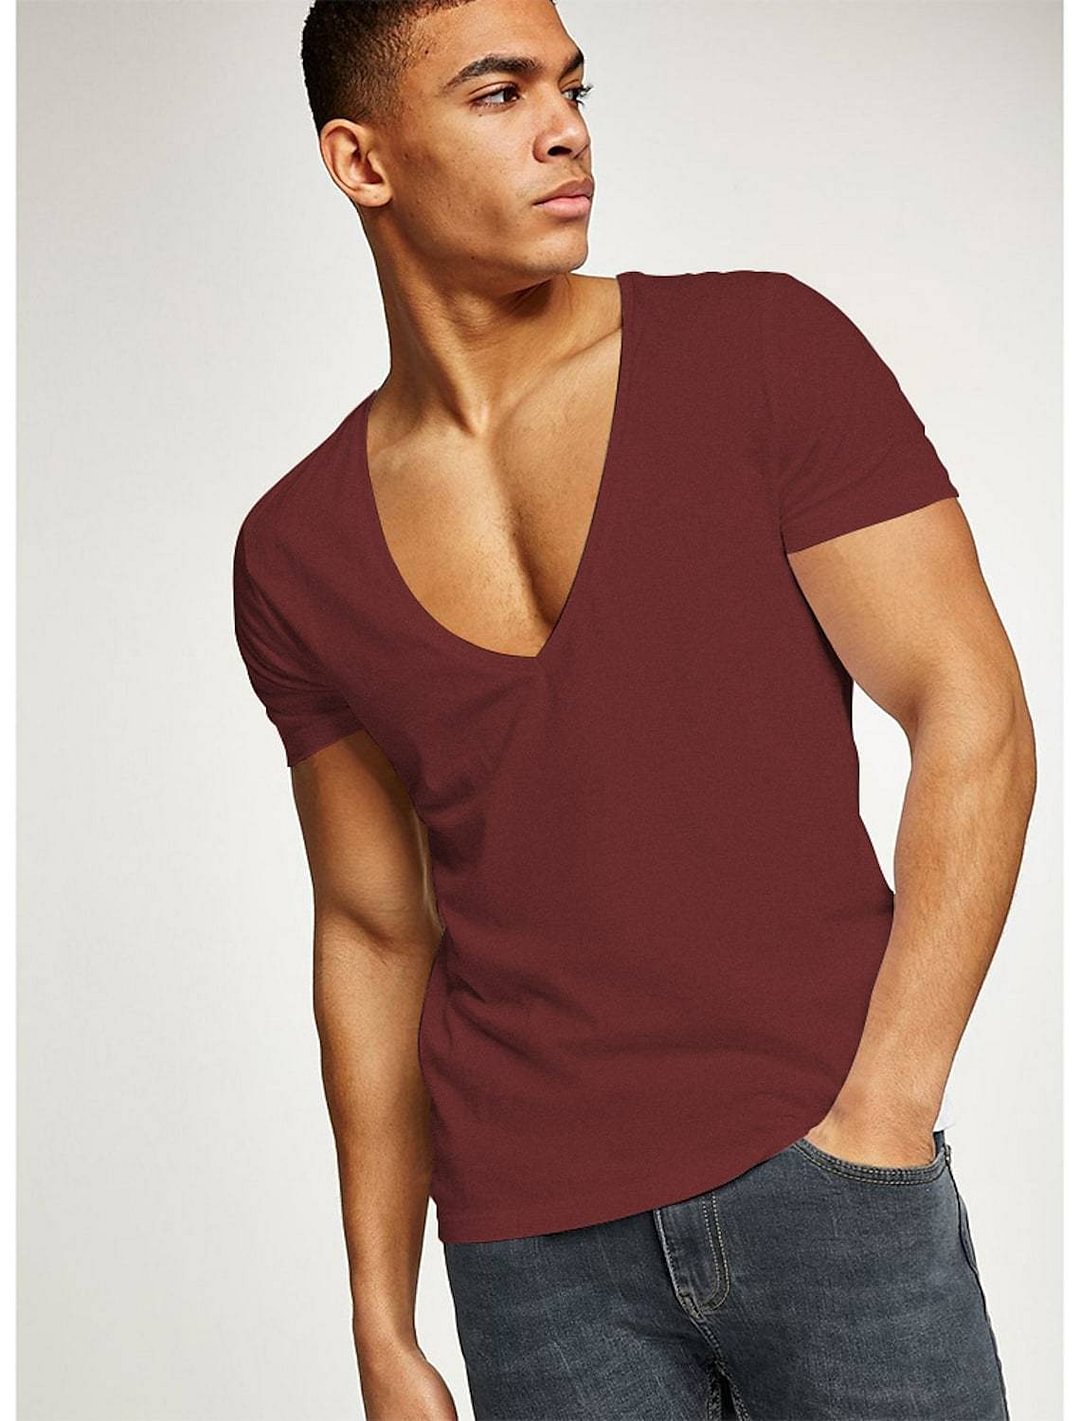 Men's Shirt non-printing Plus Size Cotton Tops Cotton Casual / Daily T-Shirt Athletic Wine Red Blue Gray / Summer